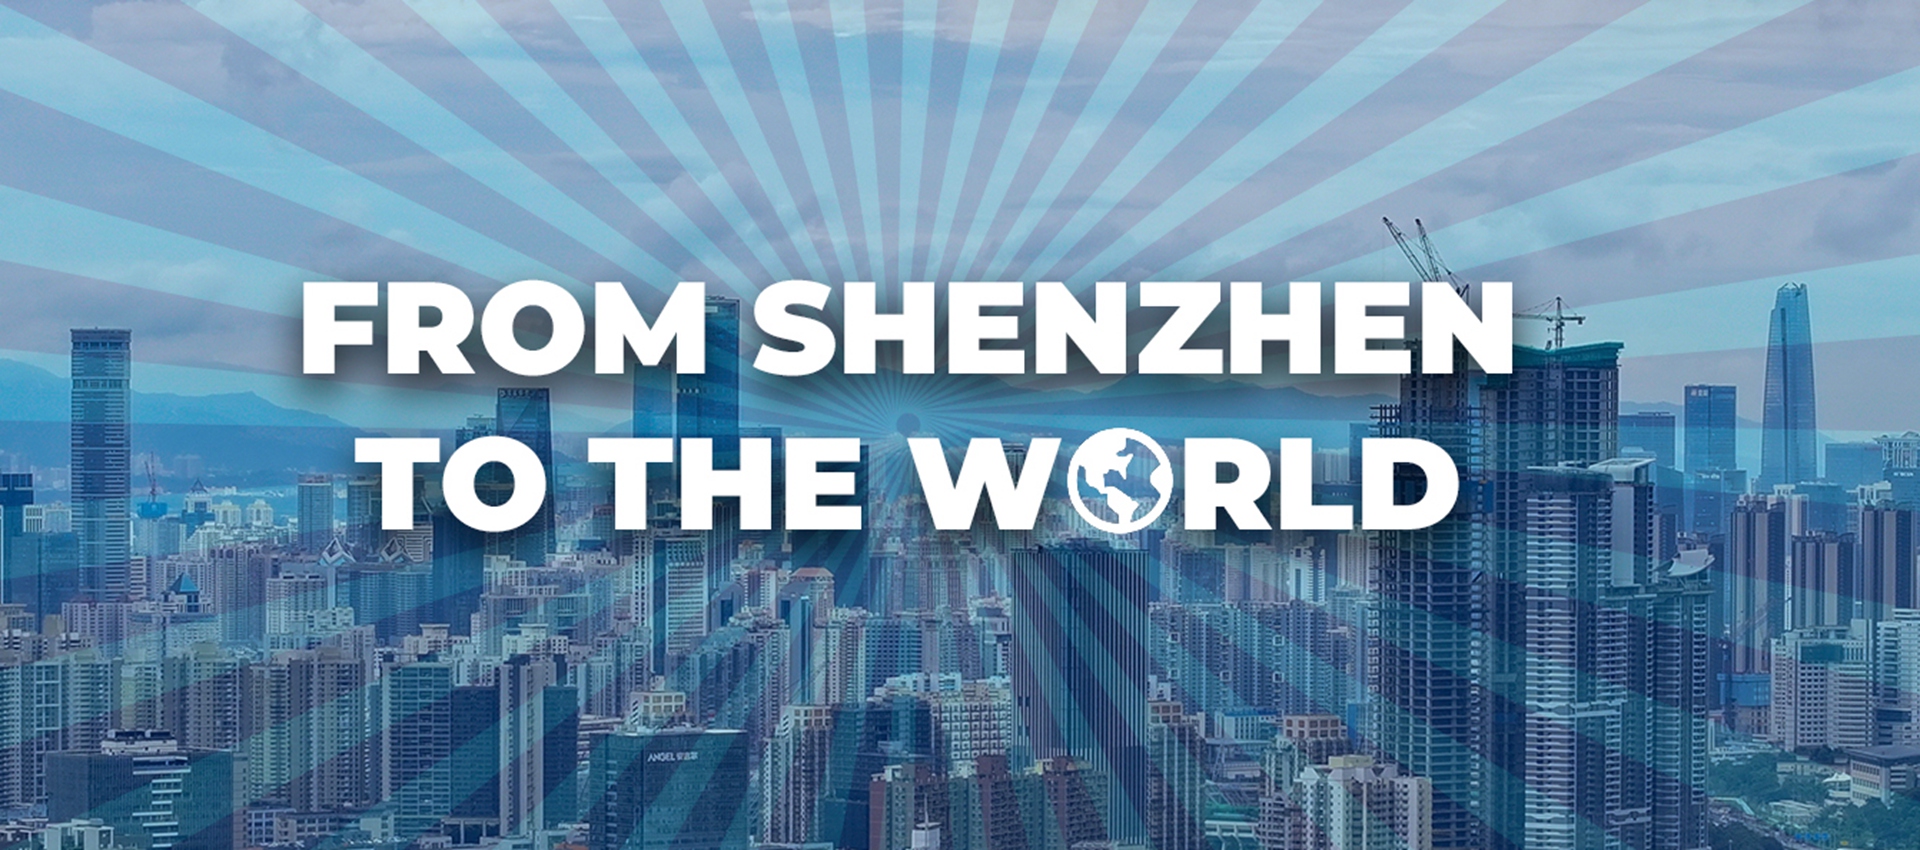 From Shenzhen to the World